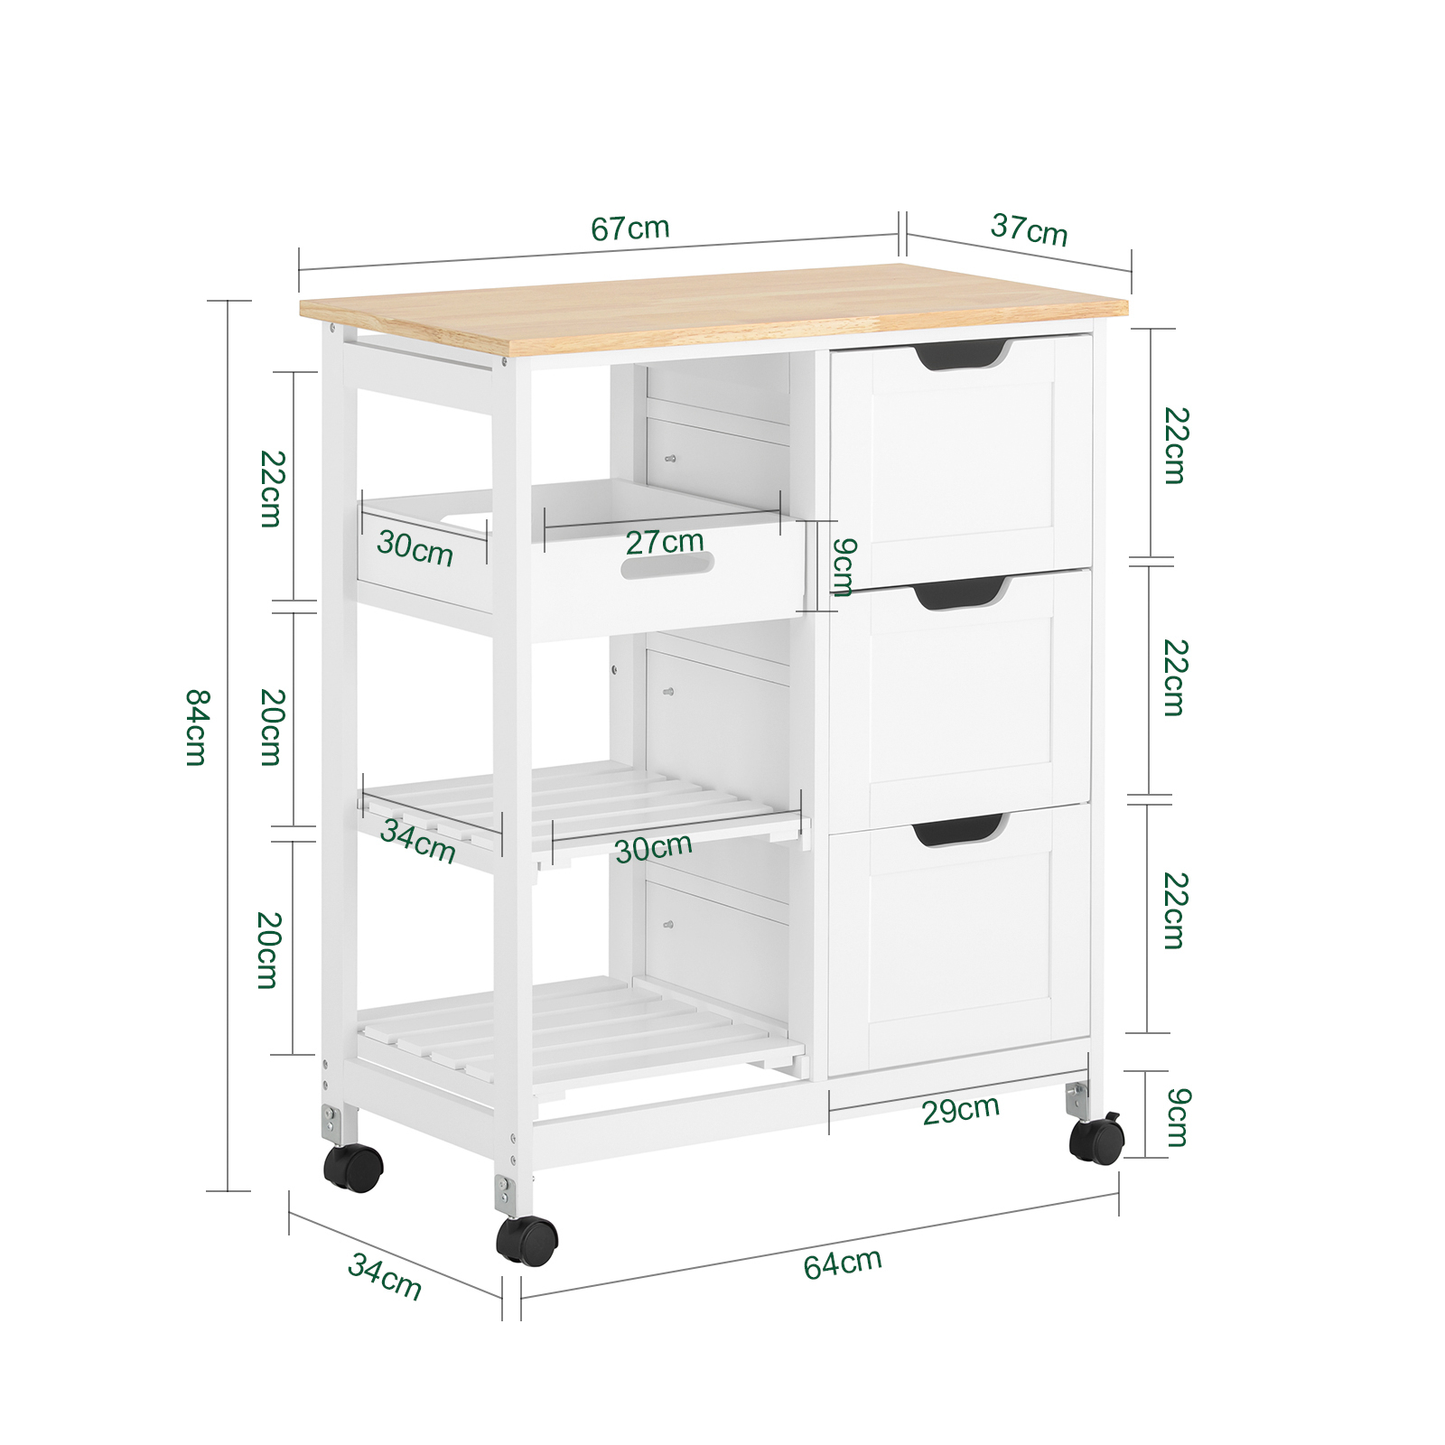 SoBuy Kitchen Serving Cart with 3 Drawers and Removable Tray,Kitchen Storage Trolley,White